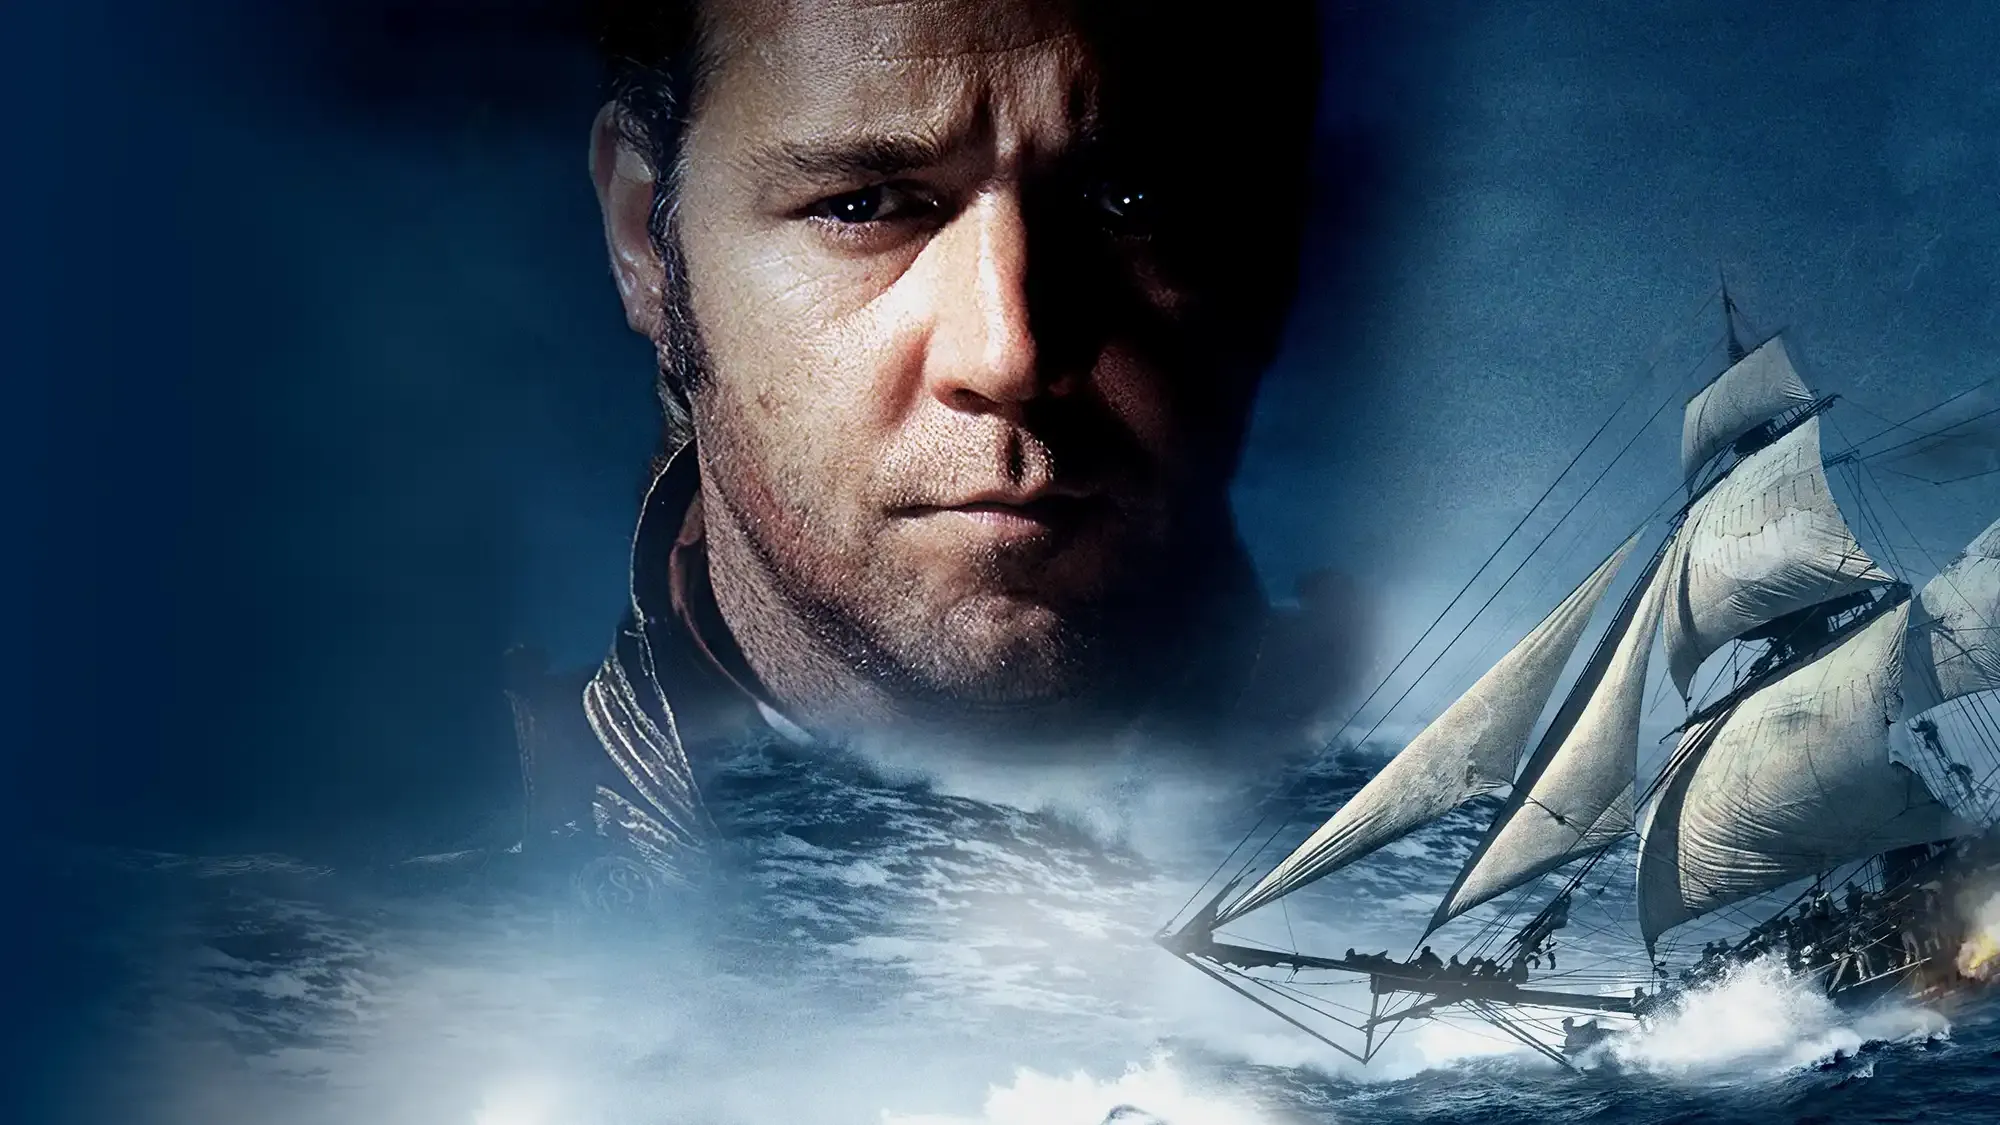 Master and Commander: The Far Side of the World movie review